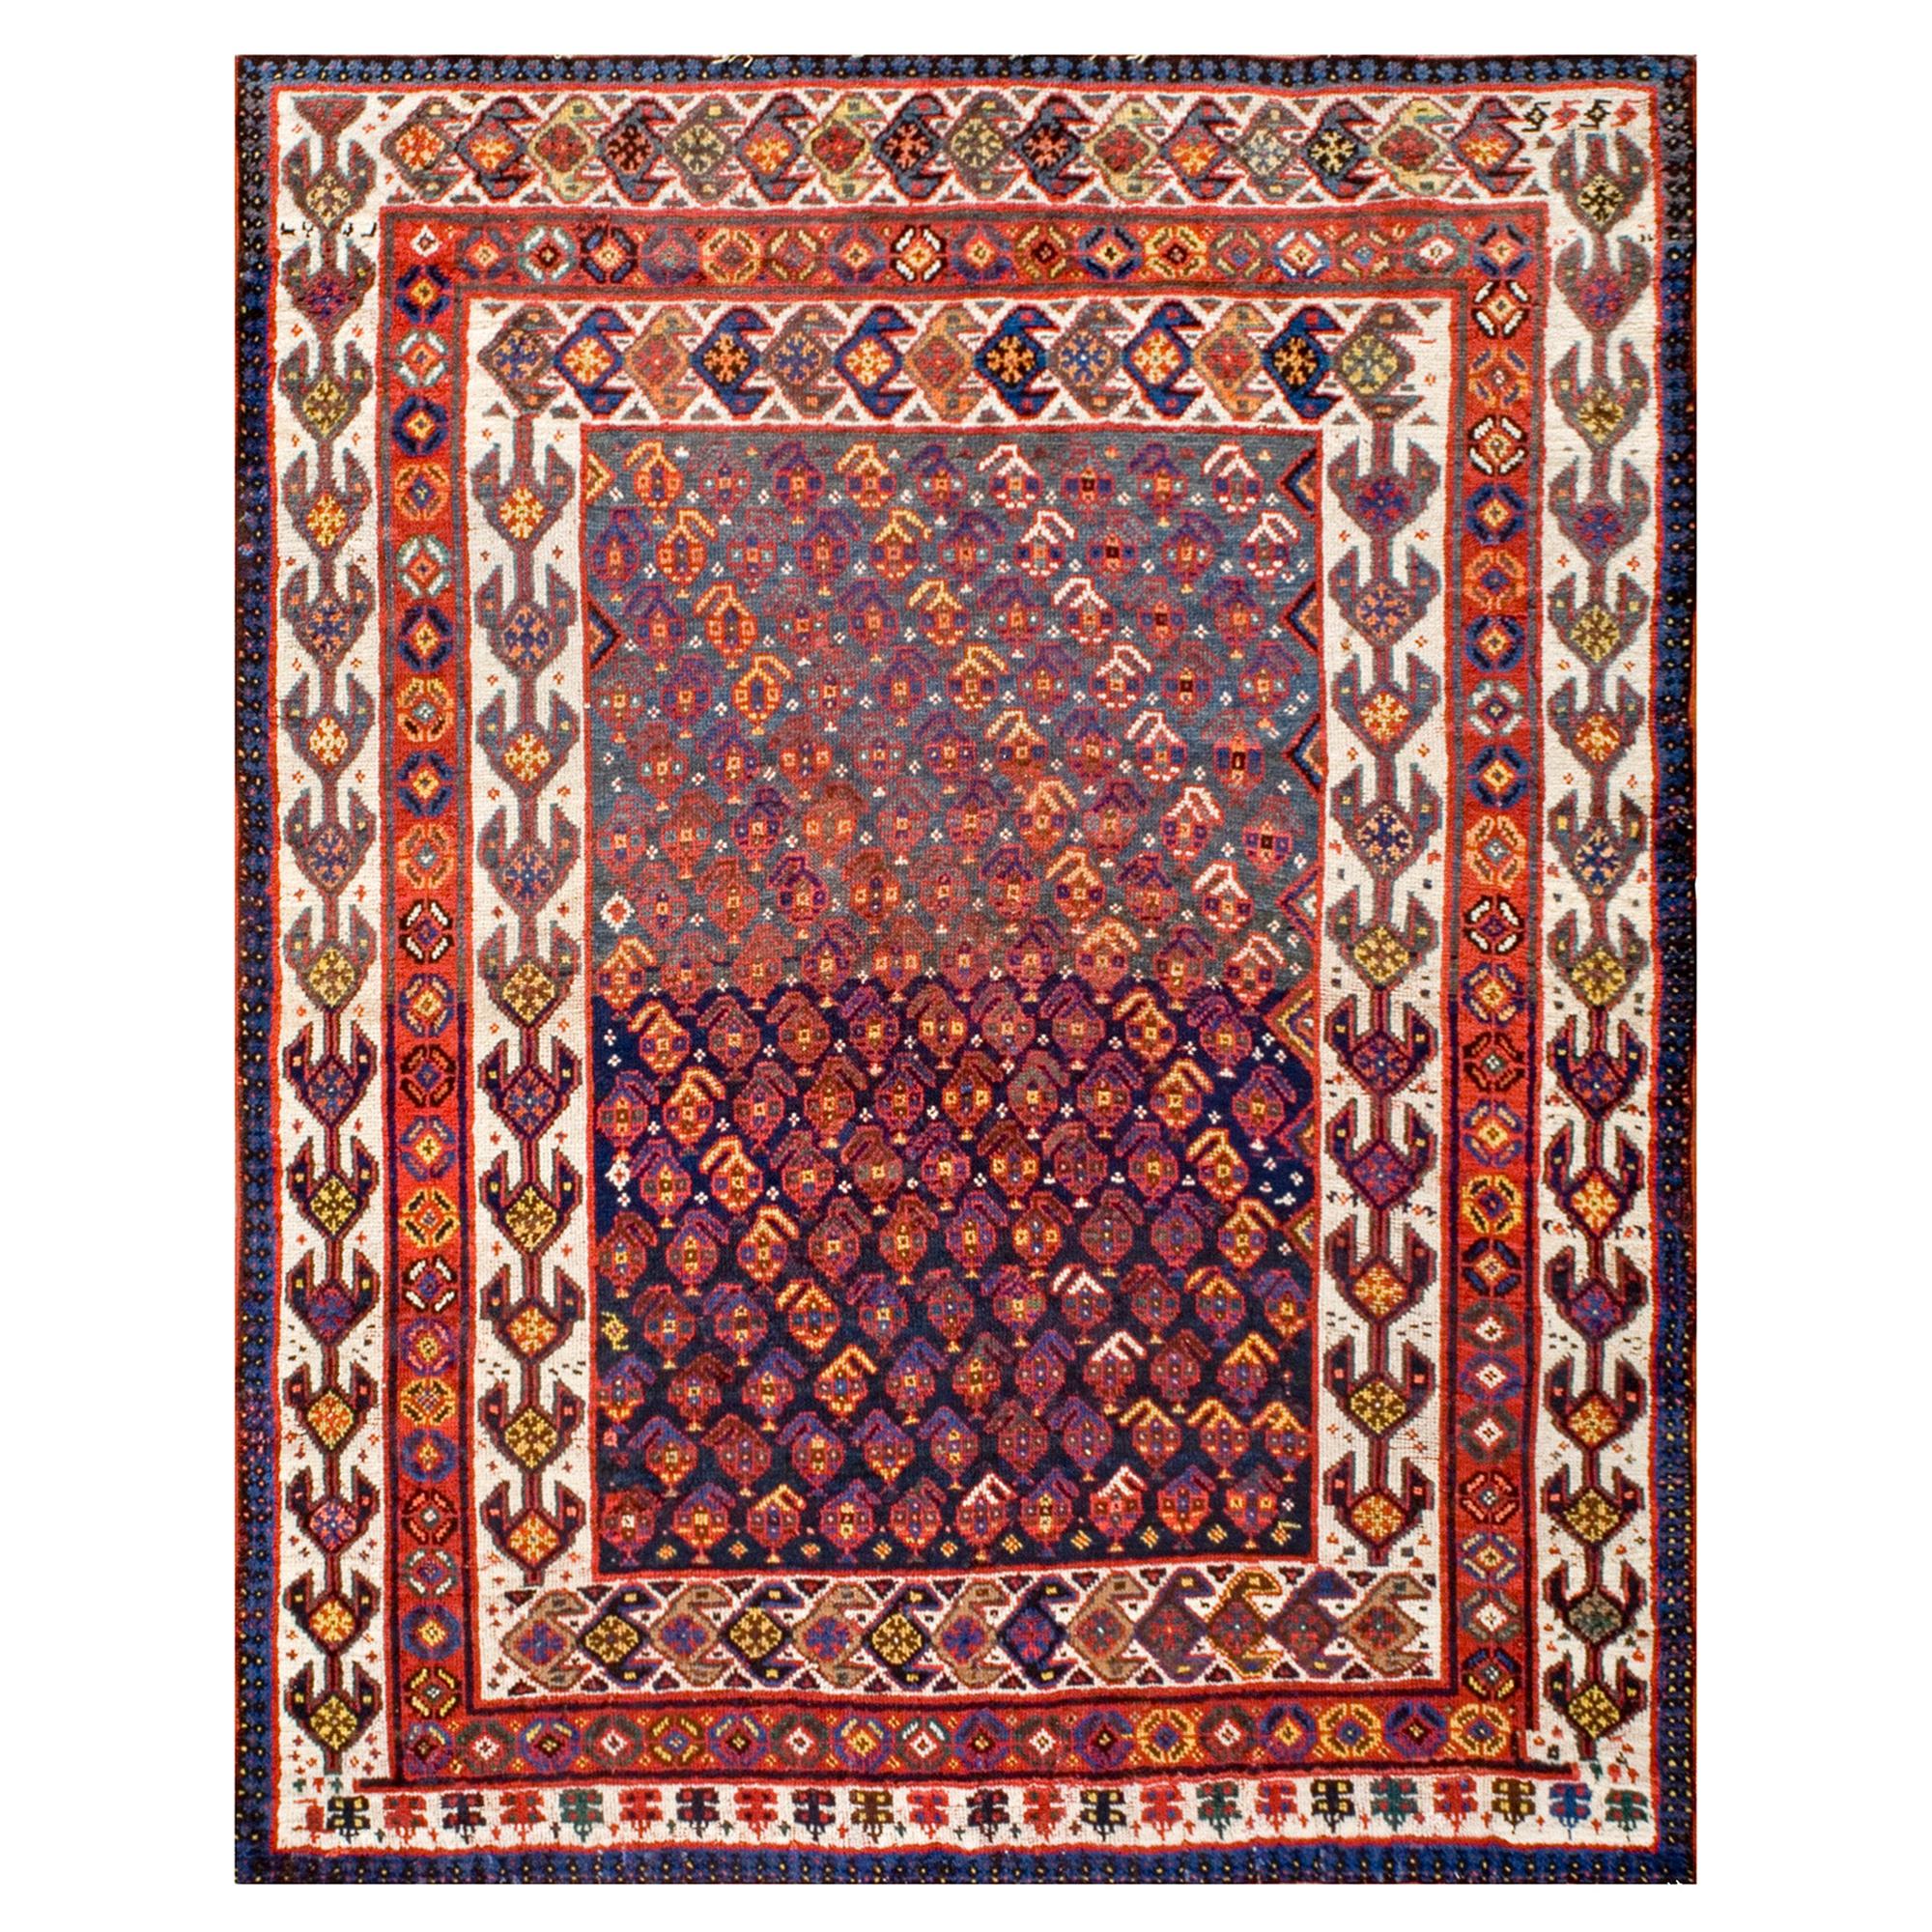 Late 19th Century S. Persian Ghashgaie Carpet ( 5'8" x 6'6" - 168 x 198 ) For Sale